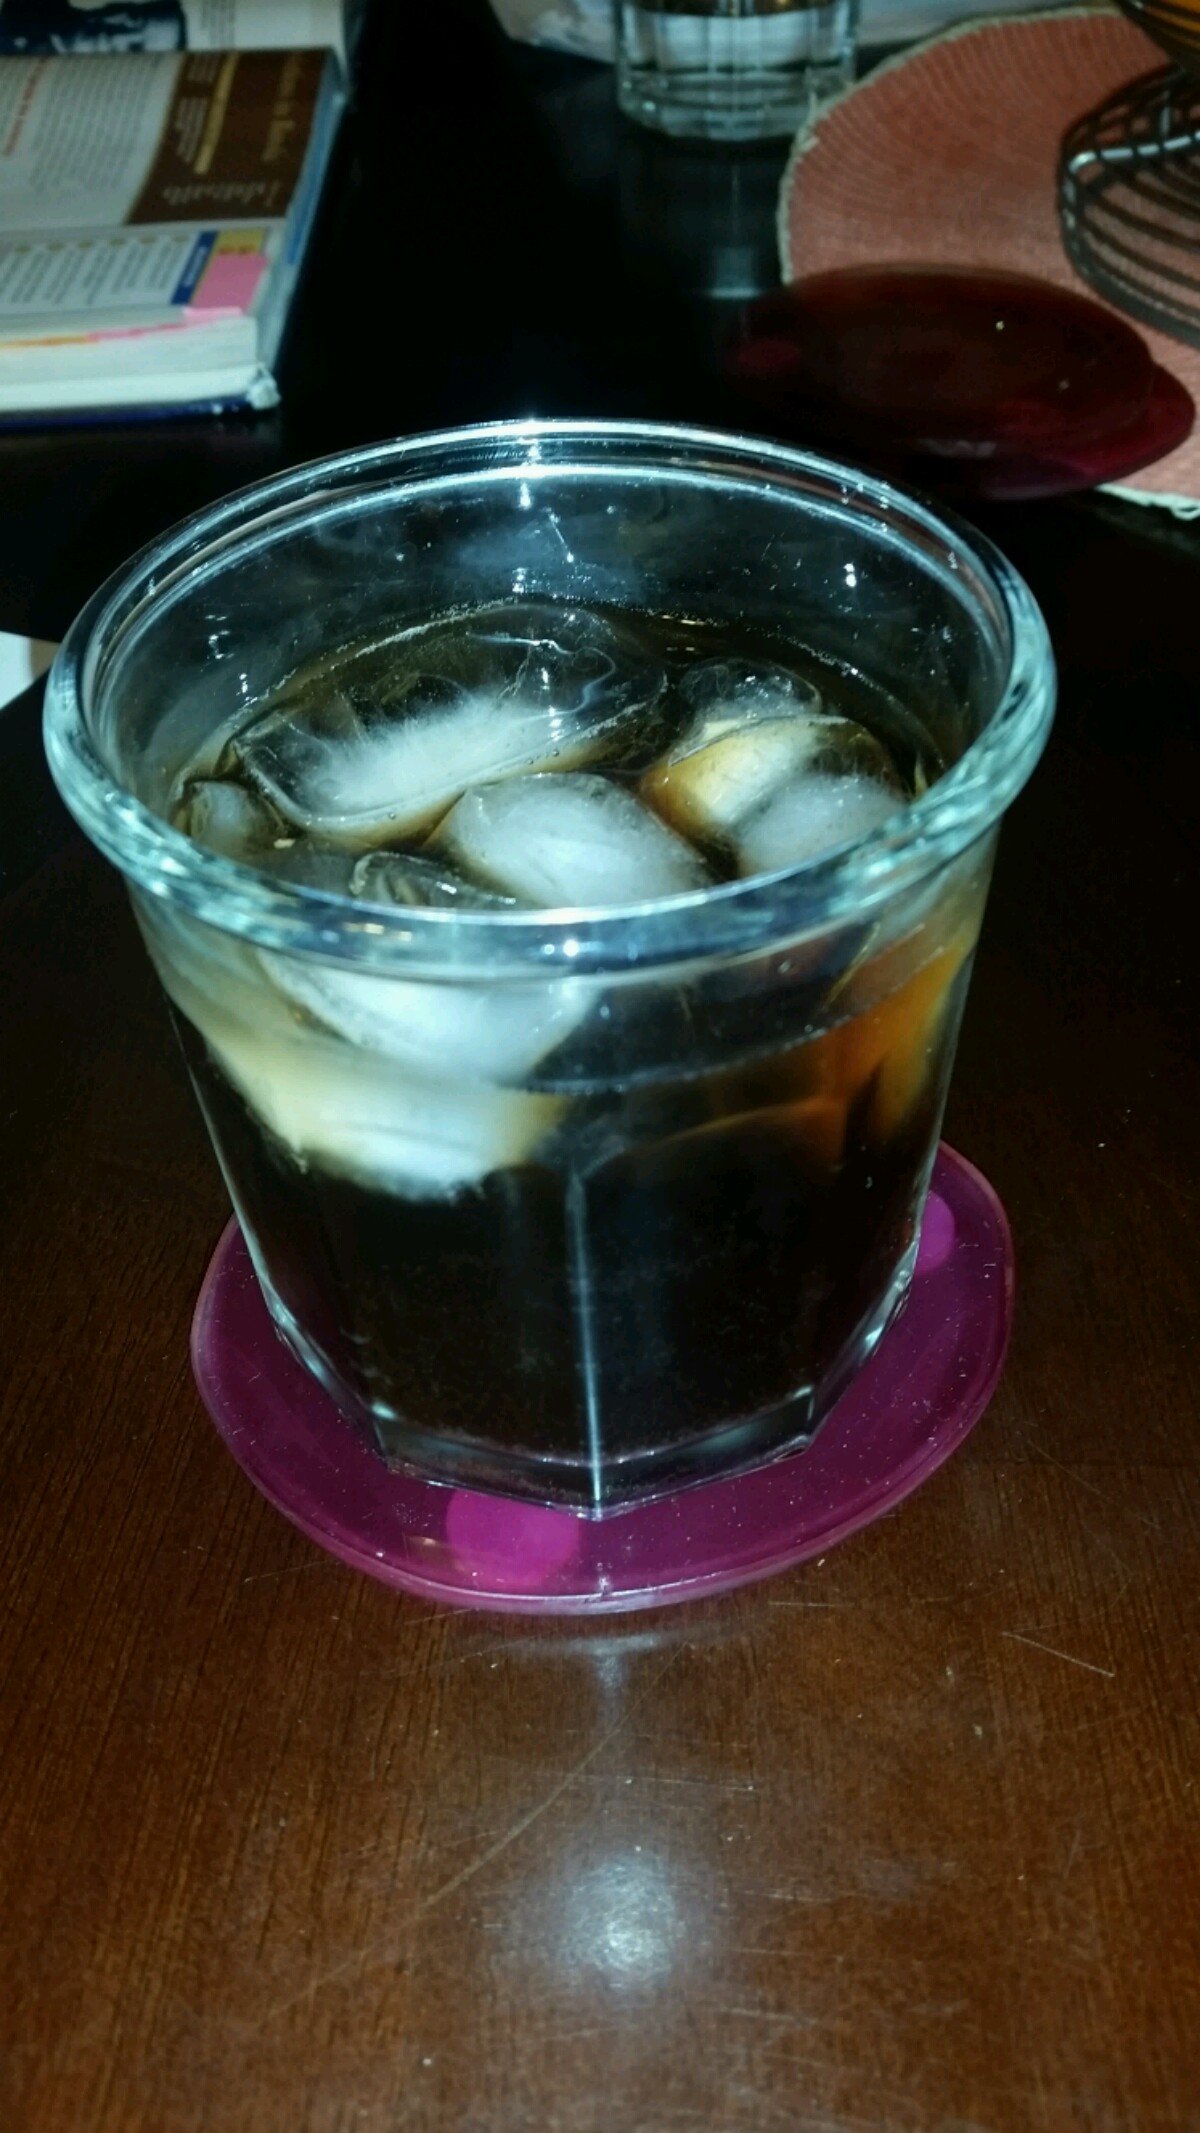 My reward! Very strong Jack and Coke!